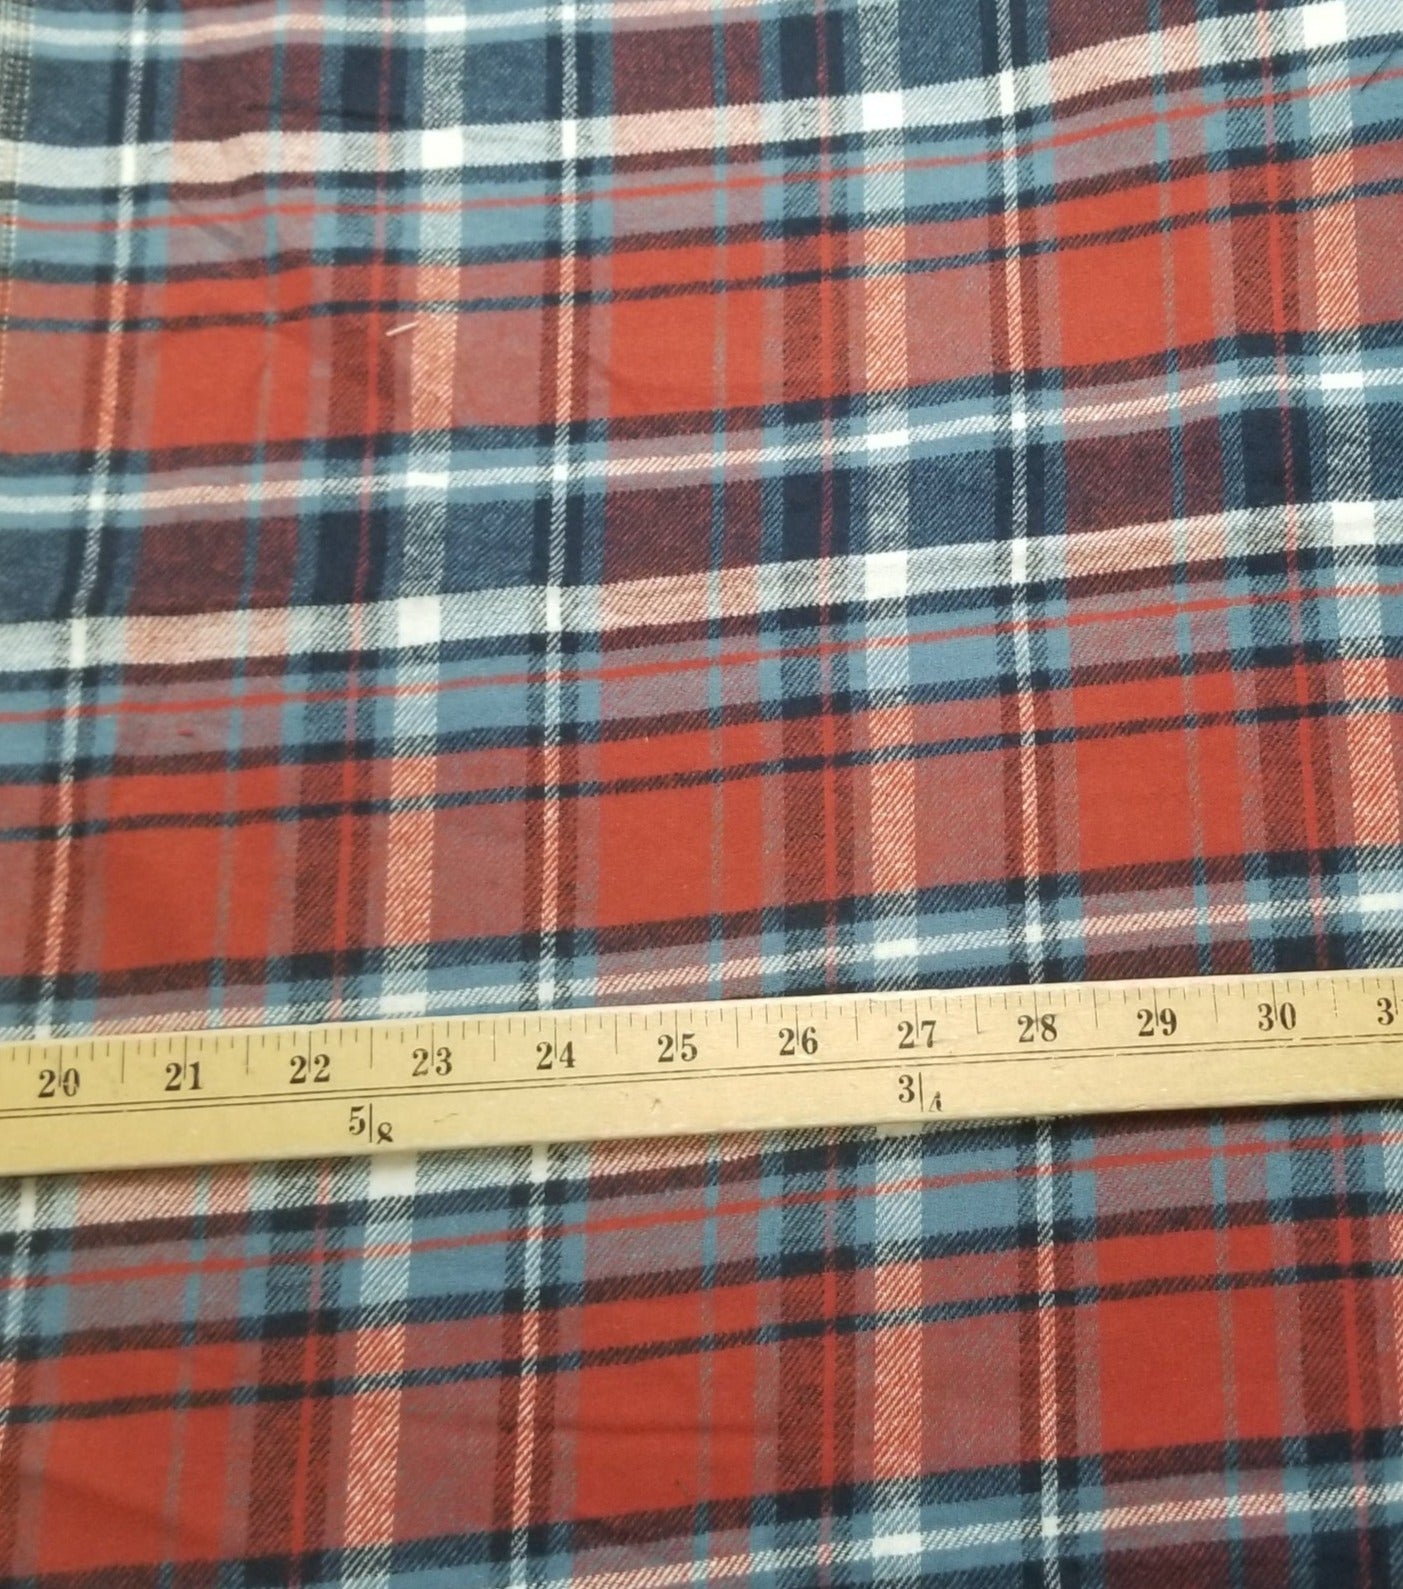 Designer Deadstock Yarn Dyed Single Brushed Flannel Burbank Red and Blue Plaid Shirting Cotton Woven-Sold by the yard